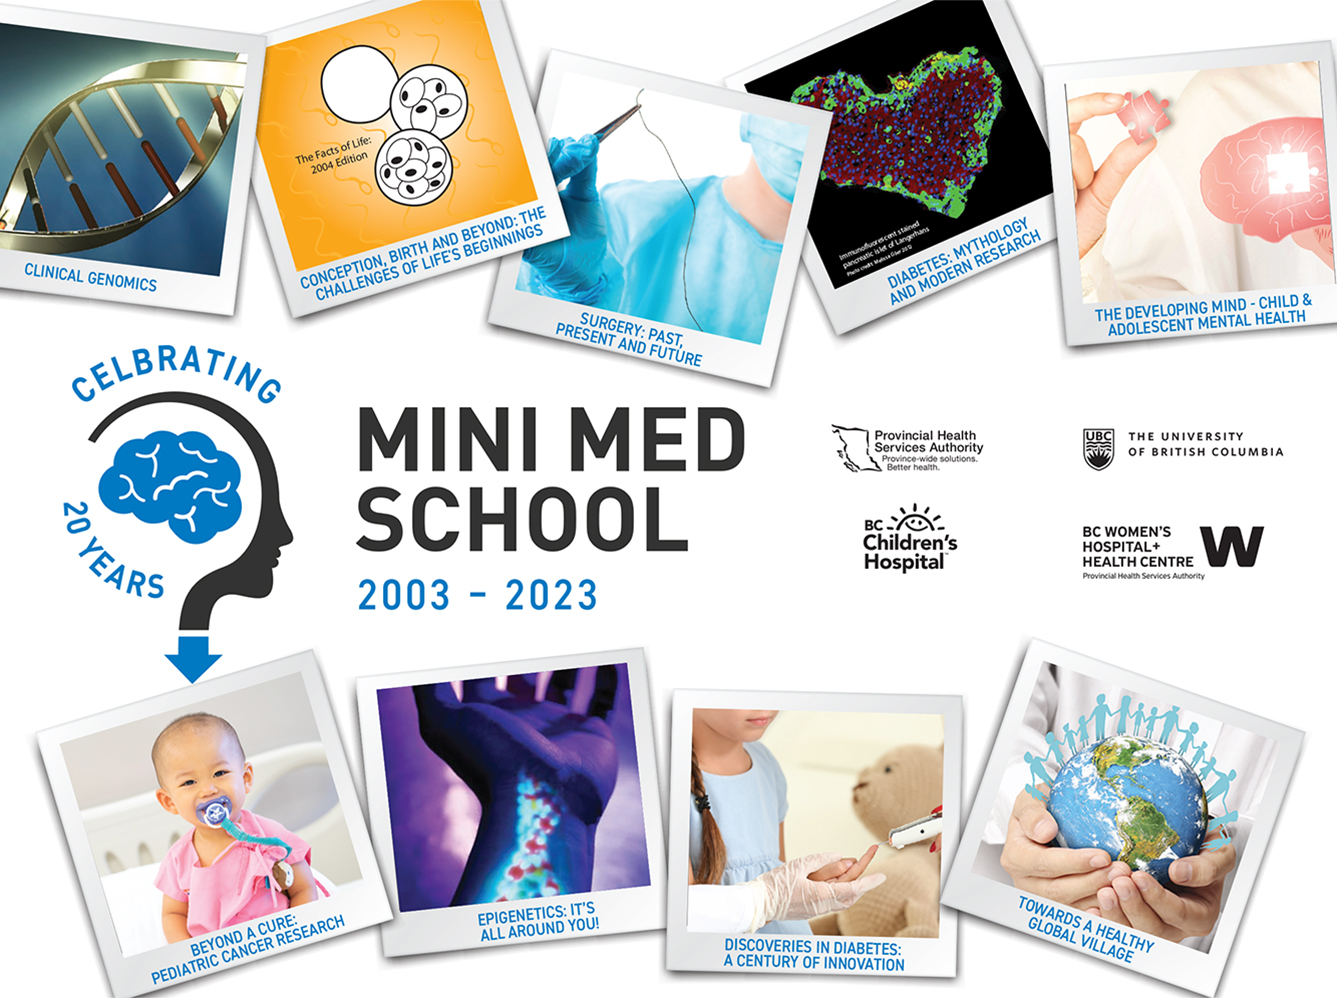 The Mini Med School 20th anniversary banner that contains multiple banners from past Mini Med School events